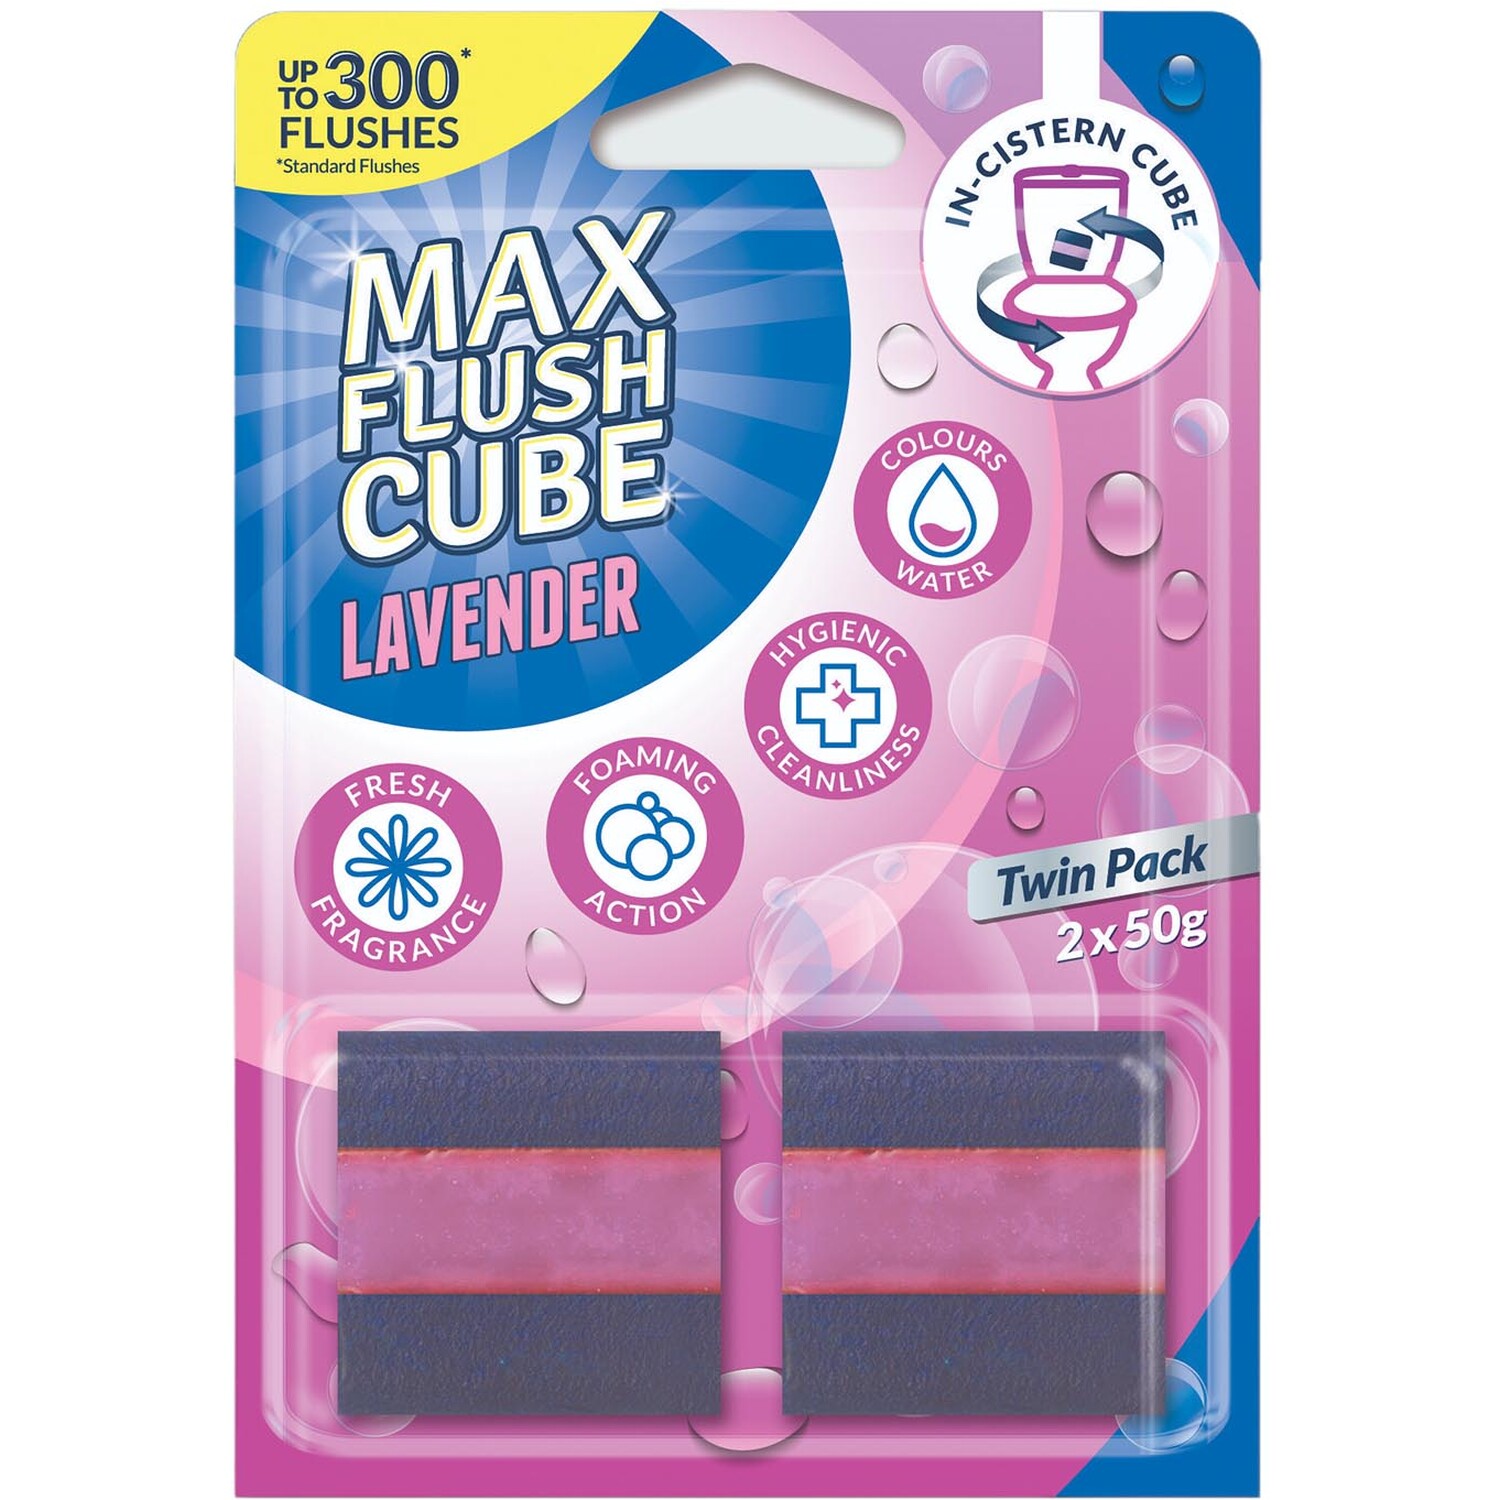 Max Flush Cube Twin Pack - Lavender Image